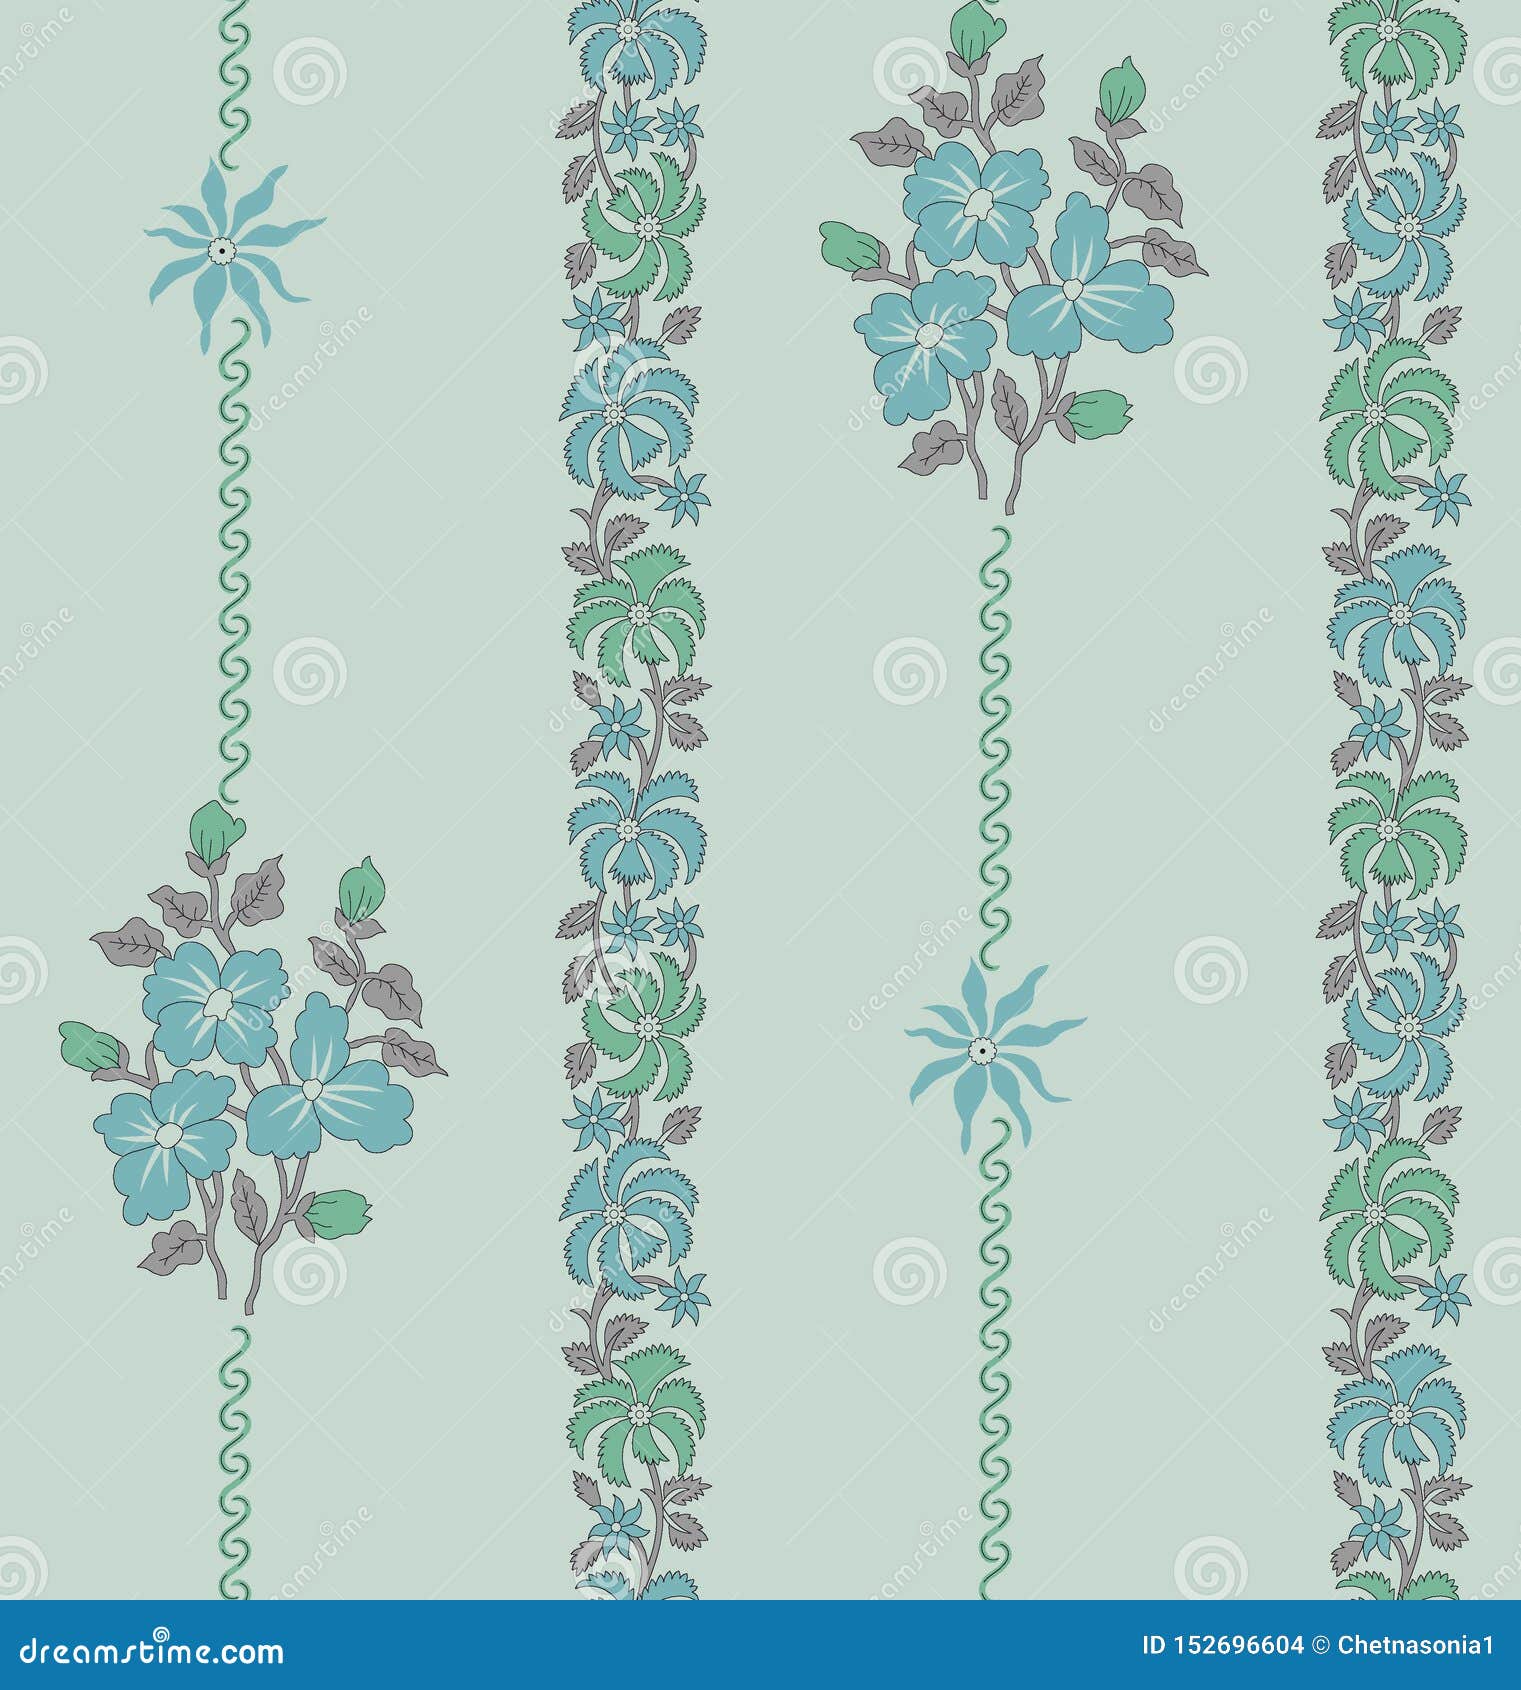 Seamless Floral  Motif  Design With Floral  Border  Stock 